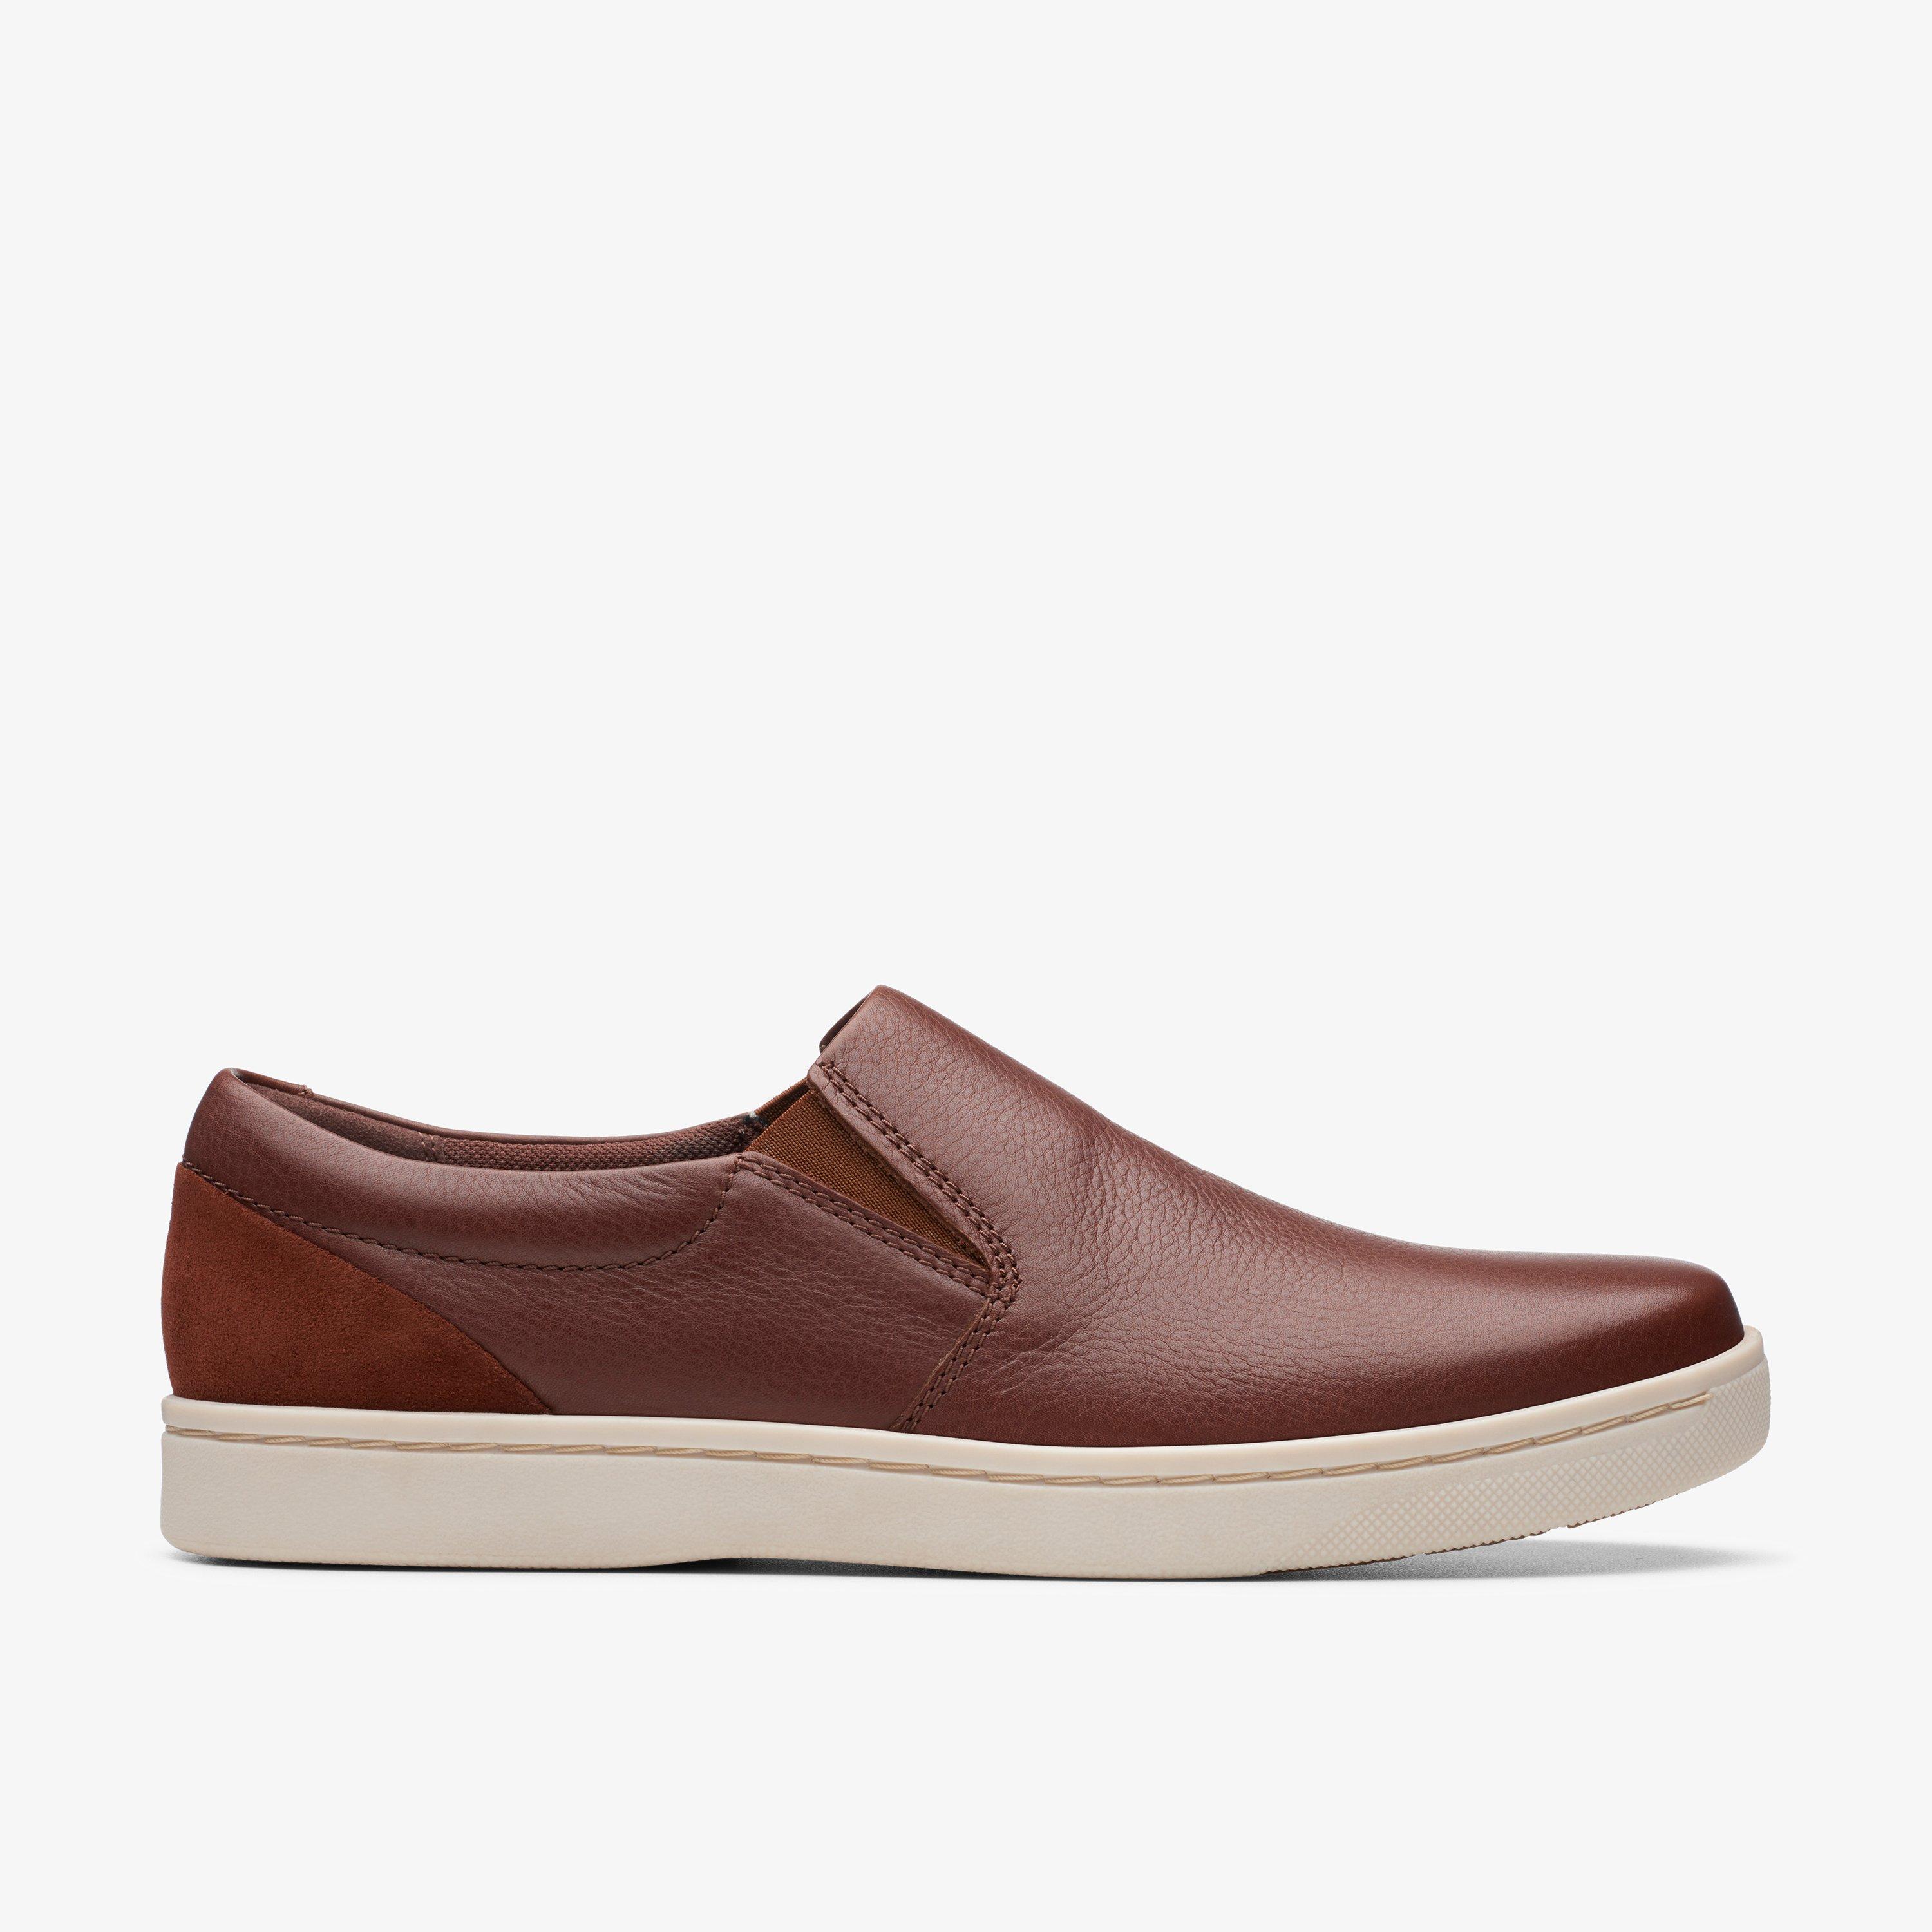 MENS Kitna Free Mahogany Leather Loafers | Clarks Outlet